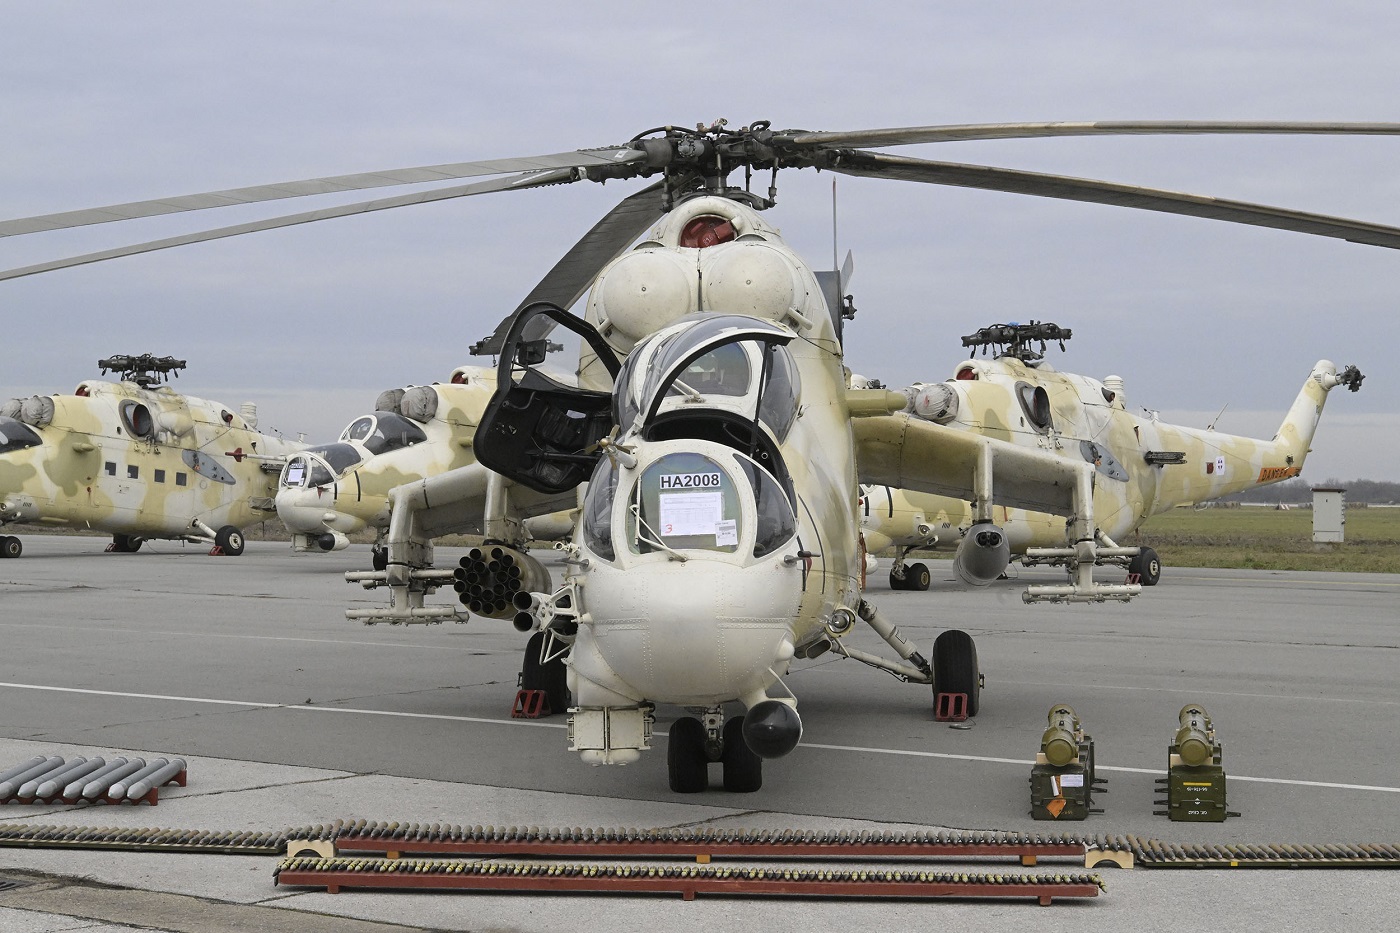 Serbian Armed Forces Acquire Mi-24P Hind Attack Helicopters Bought from Cyprus